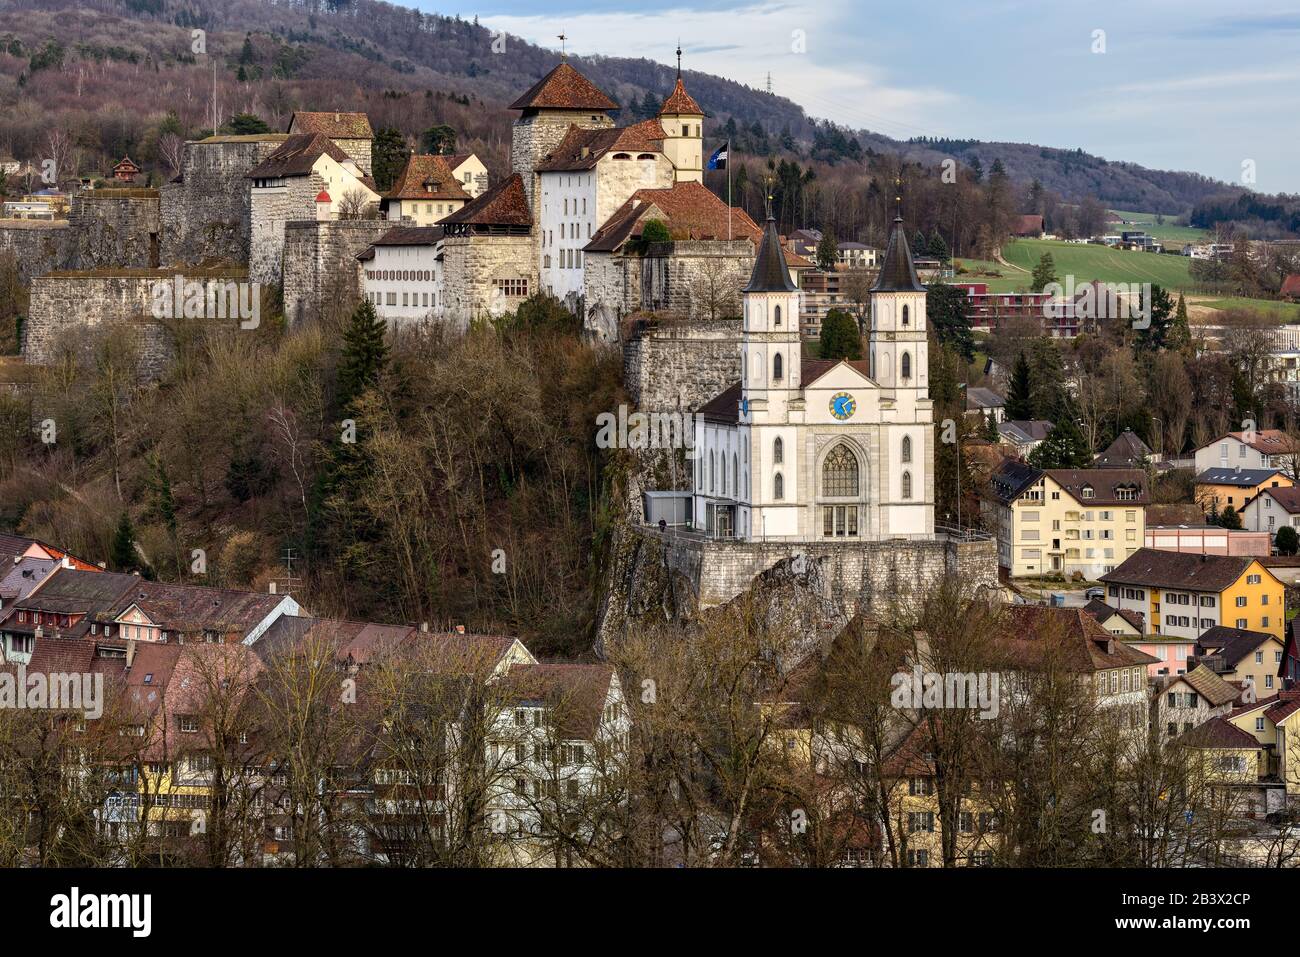 Aarburg historical Old town with Festung Aarburg castle, one of the largest castles in Switzerland, in canton Aargau, Switzerland Stock Photo